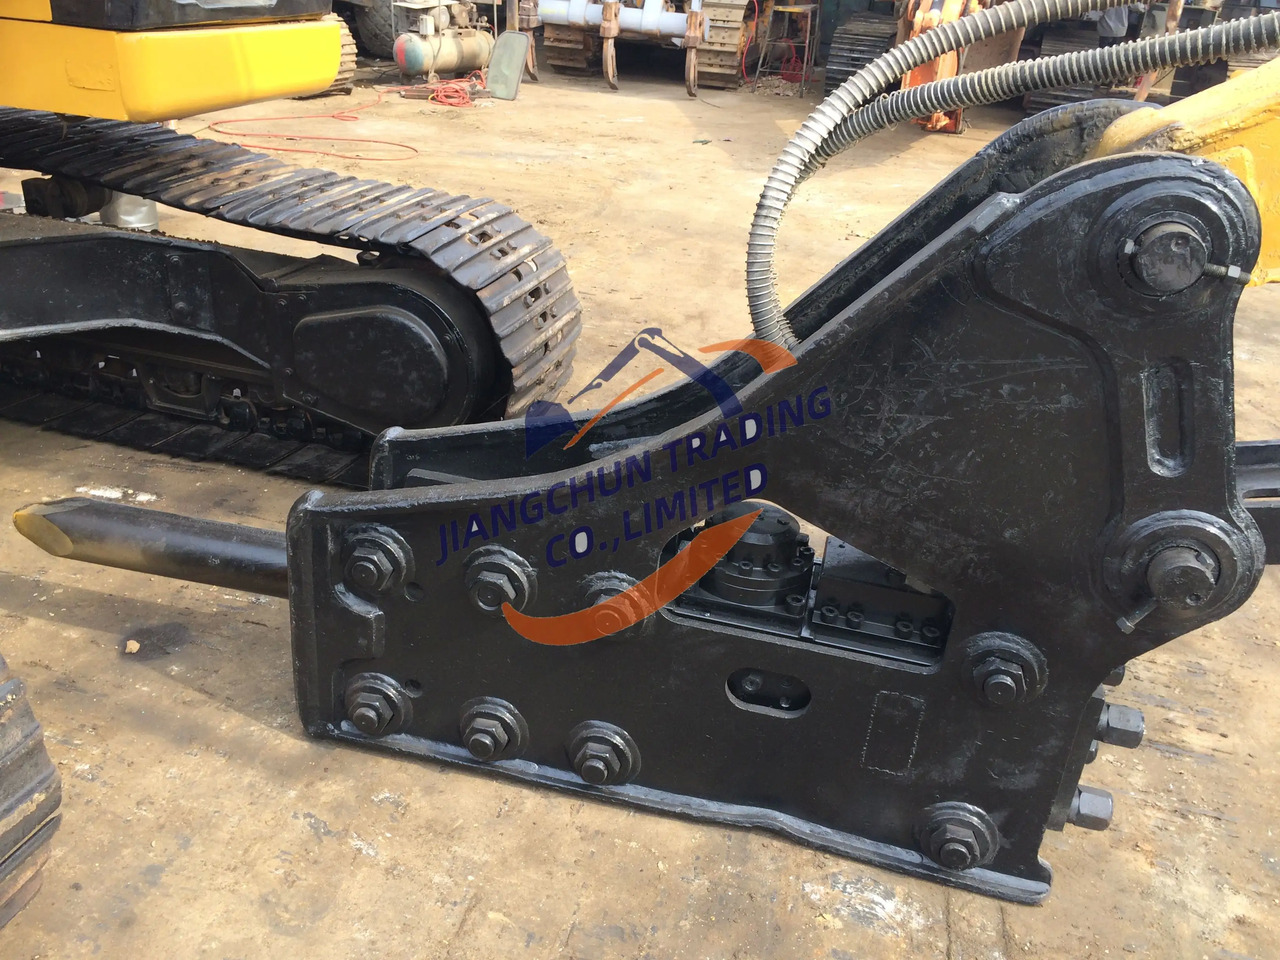 Crawler excavator perfect performance for Used 320BL Hydraulic Crawler Excavator in good condition Suitable For Construction/ Agriculture Digging: picture 5